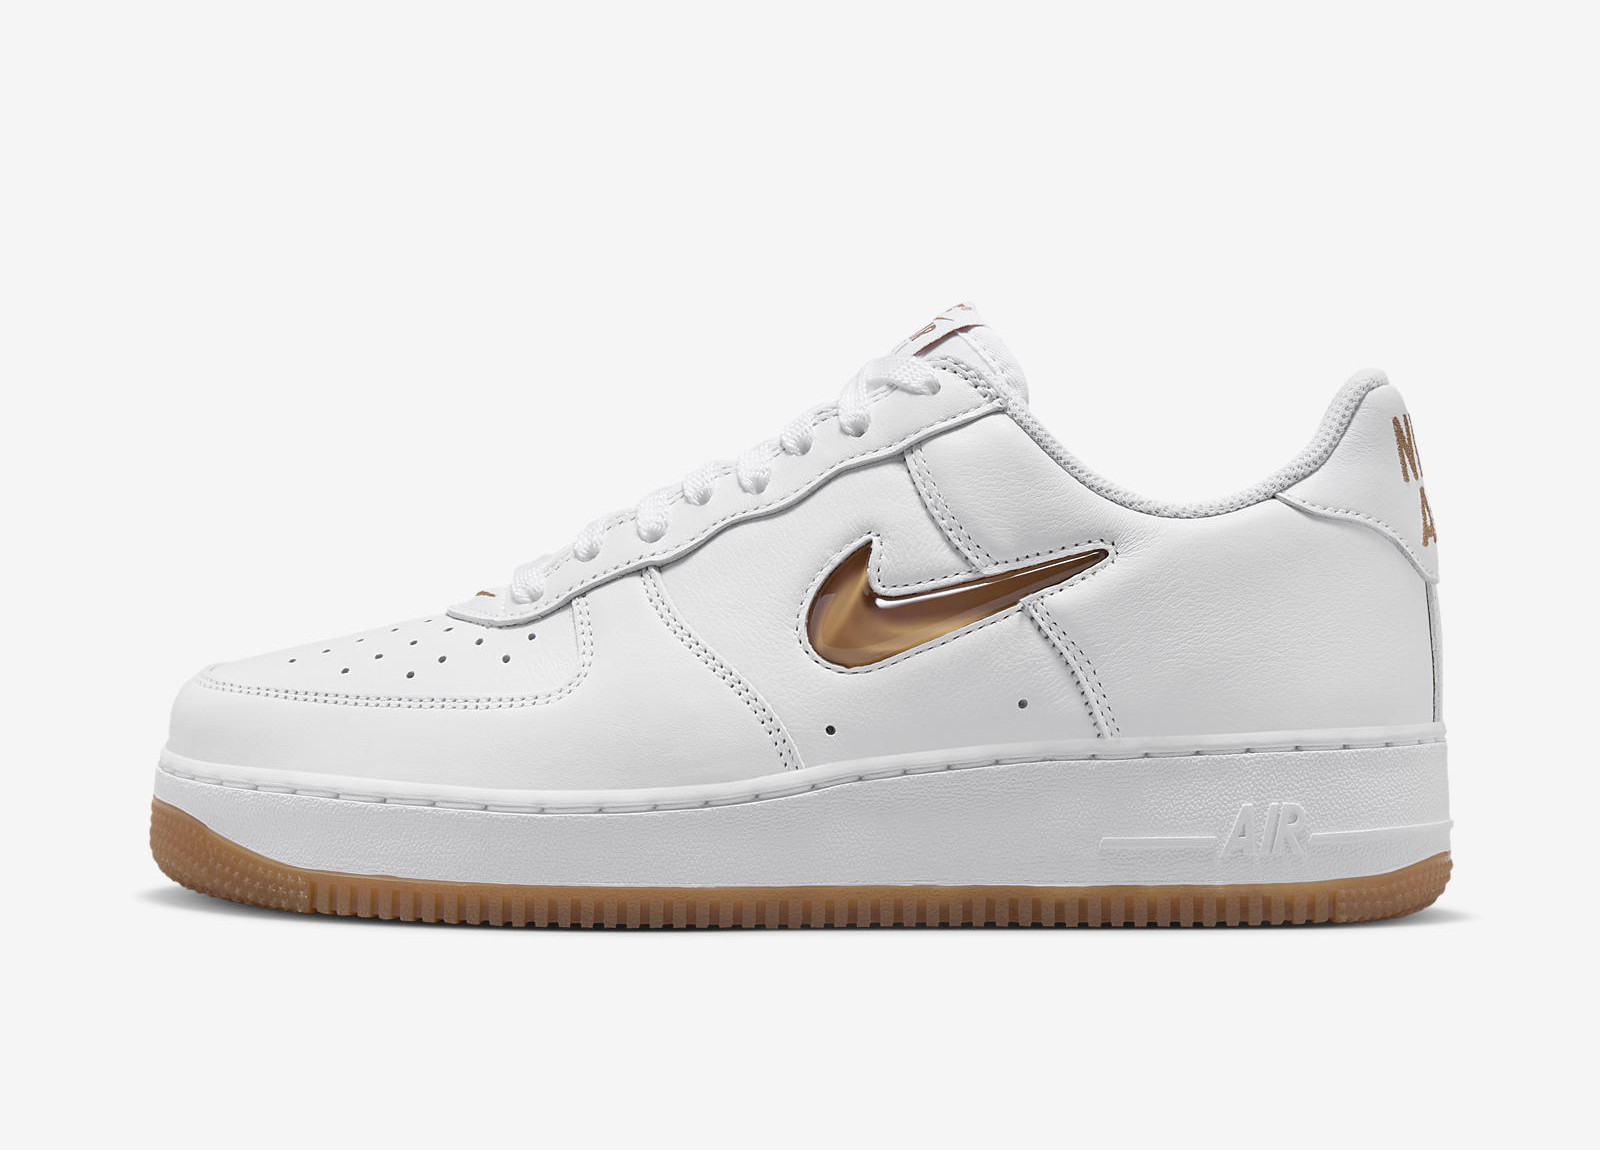 Nike Air Force 1 Low Retro
Colour of the Month
White